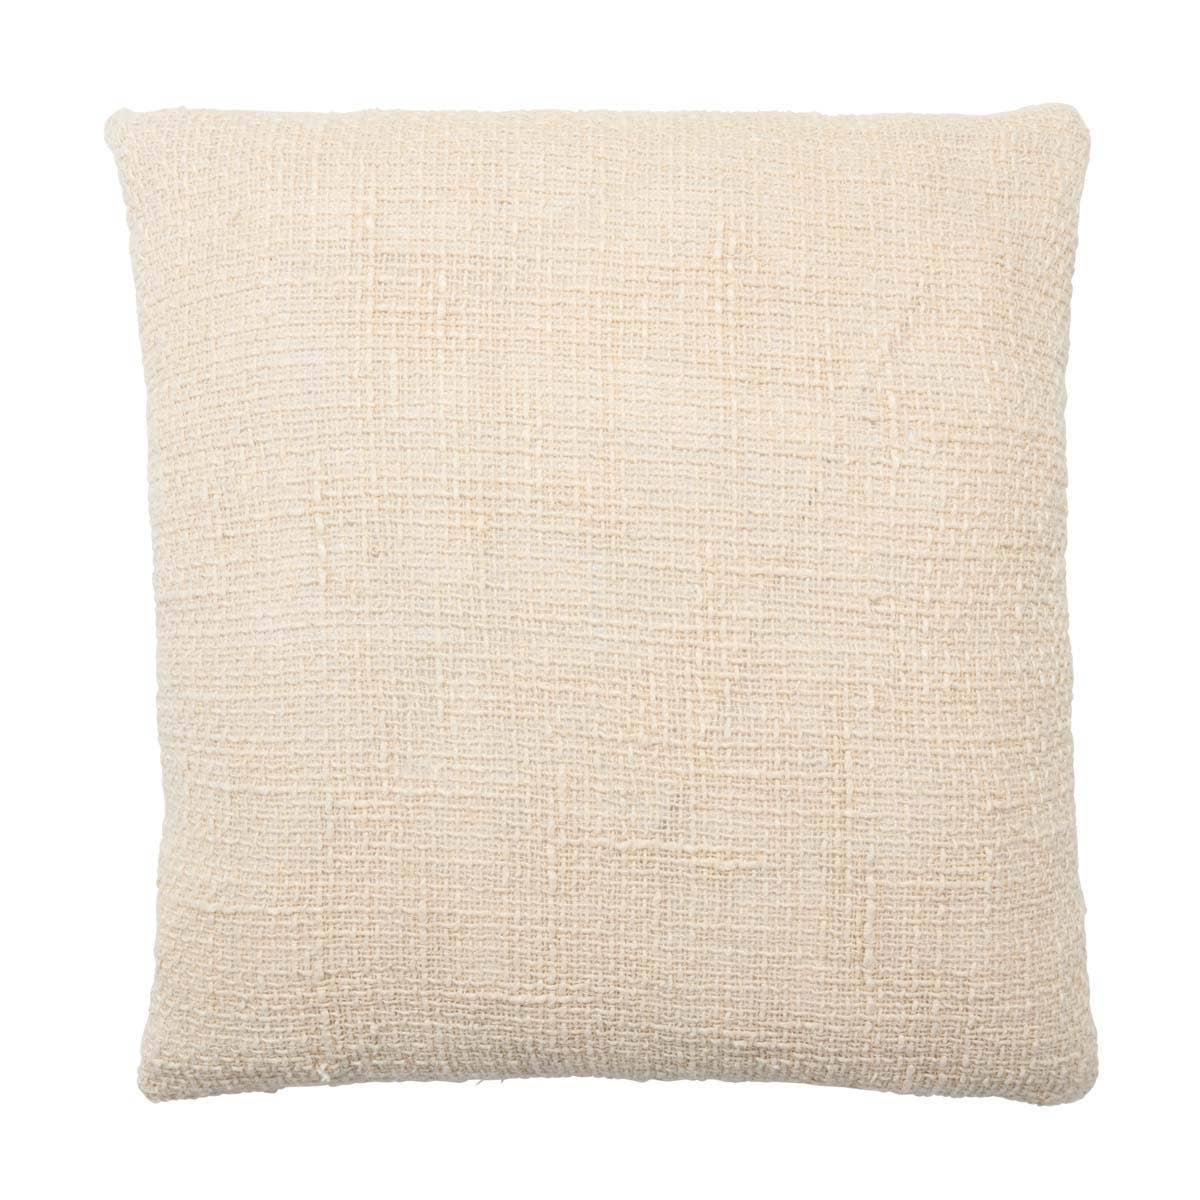 The handwoven Klara pillow Tordis delights with an intricately cross-woven linen design that exudes comfort and homeliness. The immaculate texture provides a rustic draw that thrills in any contemporary home. The Tordis design features a loose weave in a neutral cream hue.Indoor Pillow Amethyst Home provides interior design, new home construction design consulting, vintage area rugs, and lighting in the Alpharetta metro area.